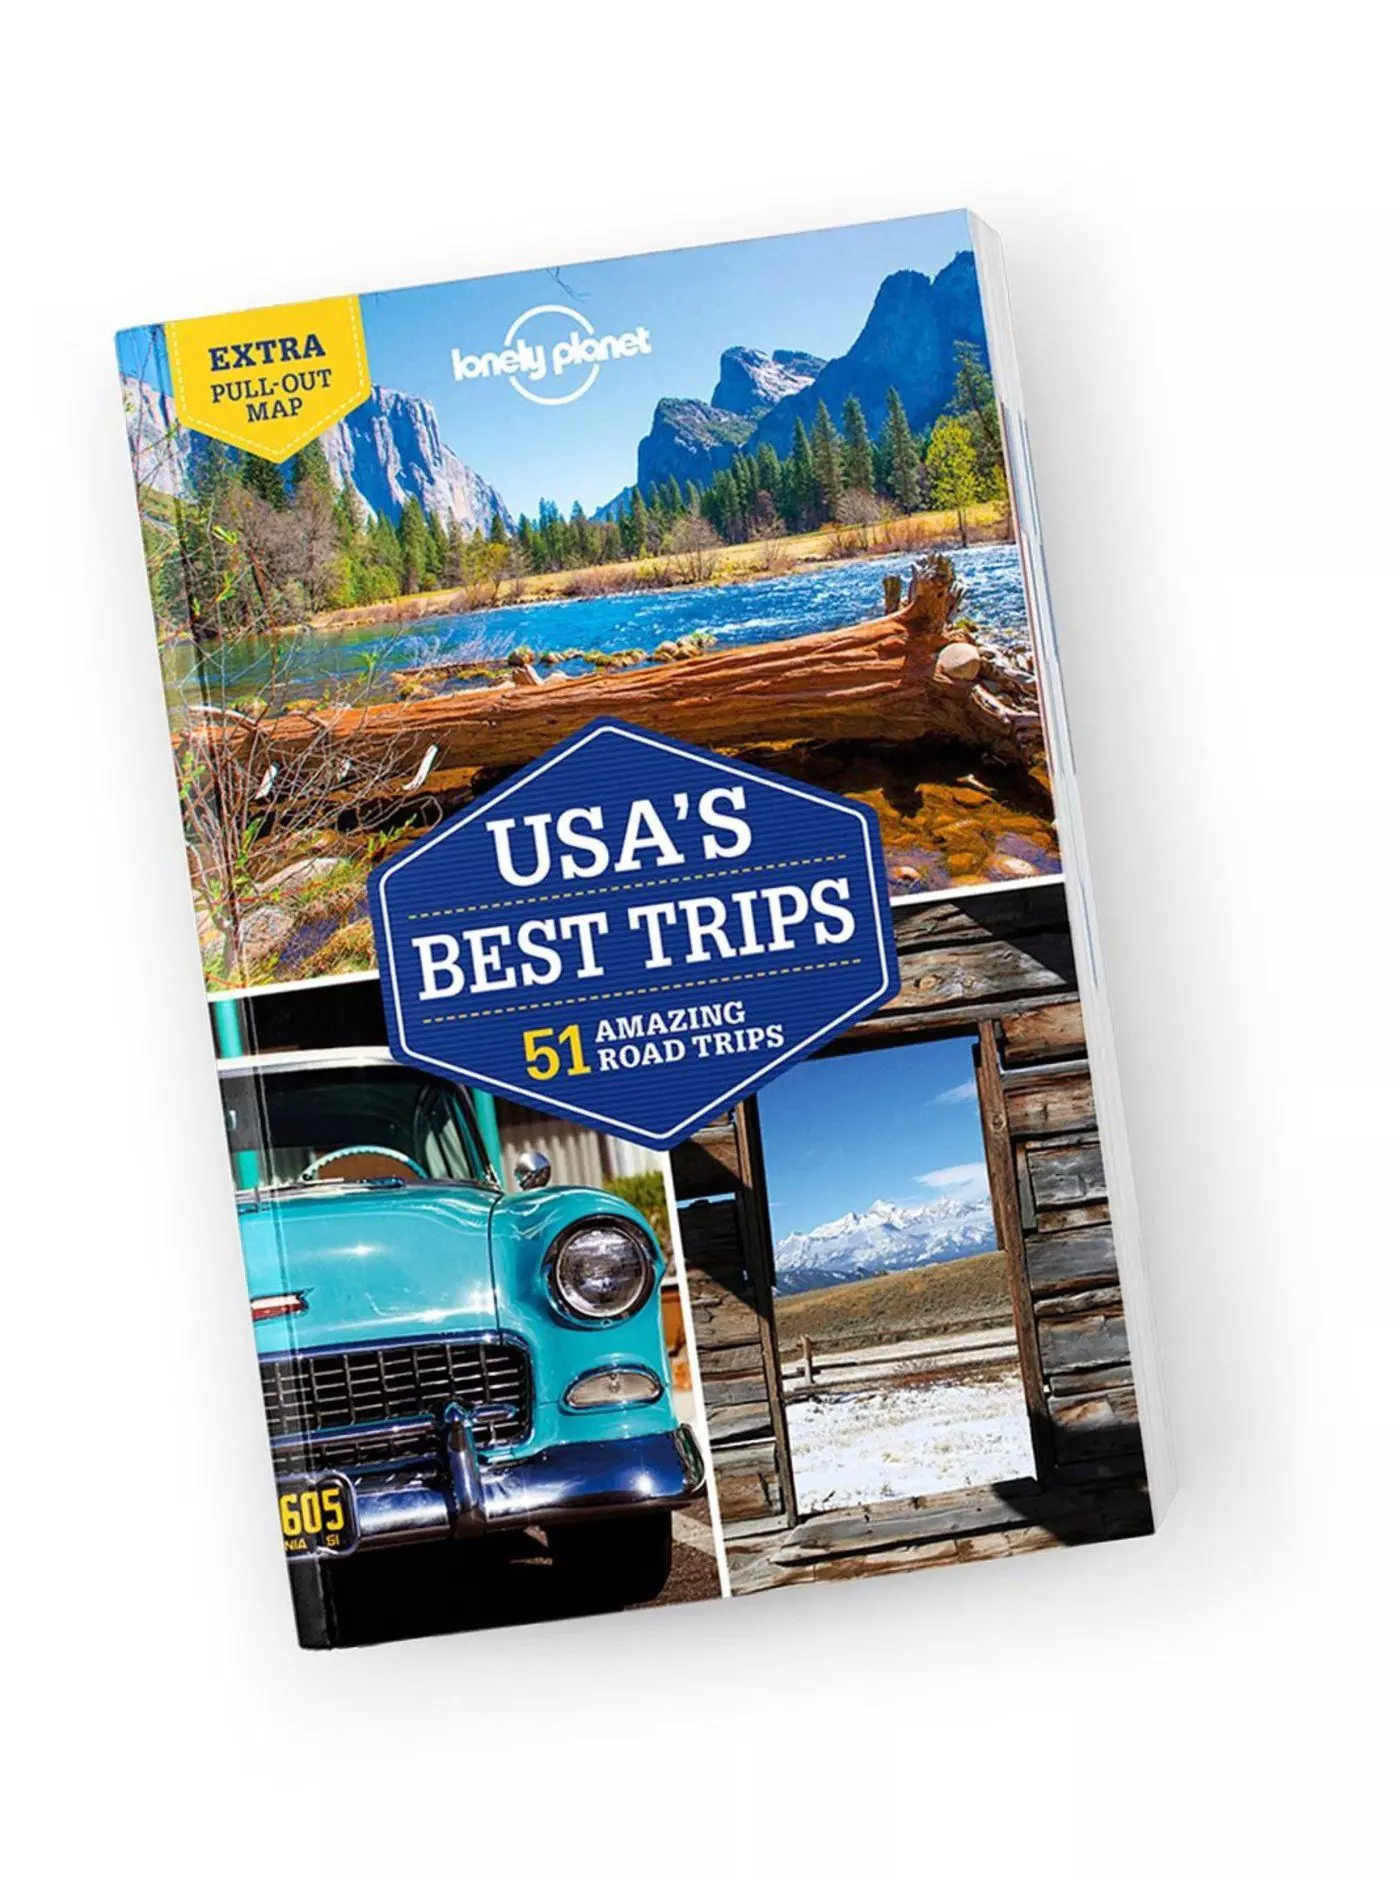 USA's Best Trips ghid turistic Lonely Planet (engleză)